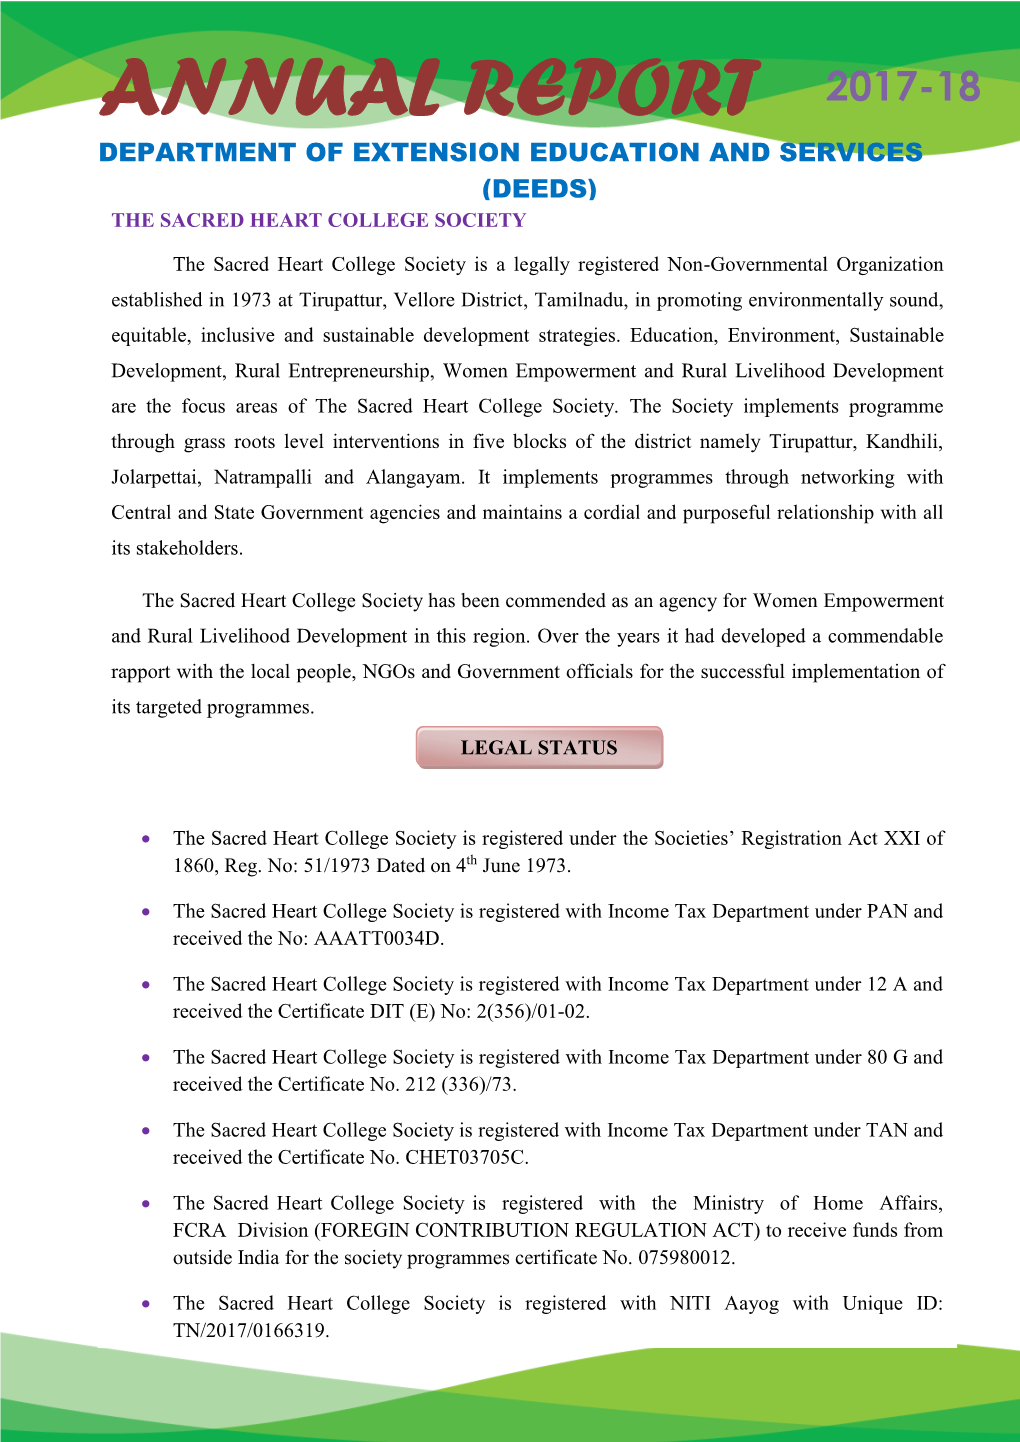 Annual Report 2017-18 Department of Extension Education and Services (Deeds) the Sacred Heart College Society